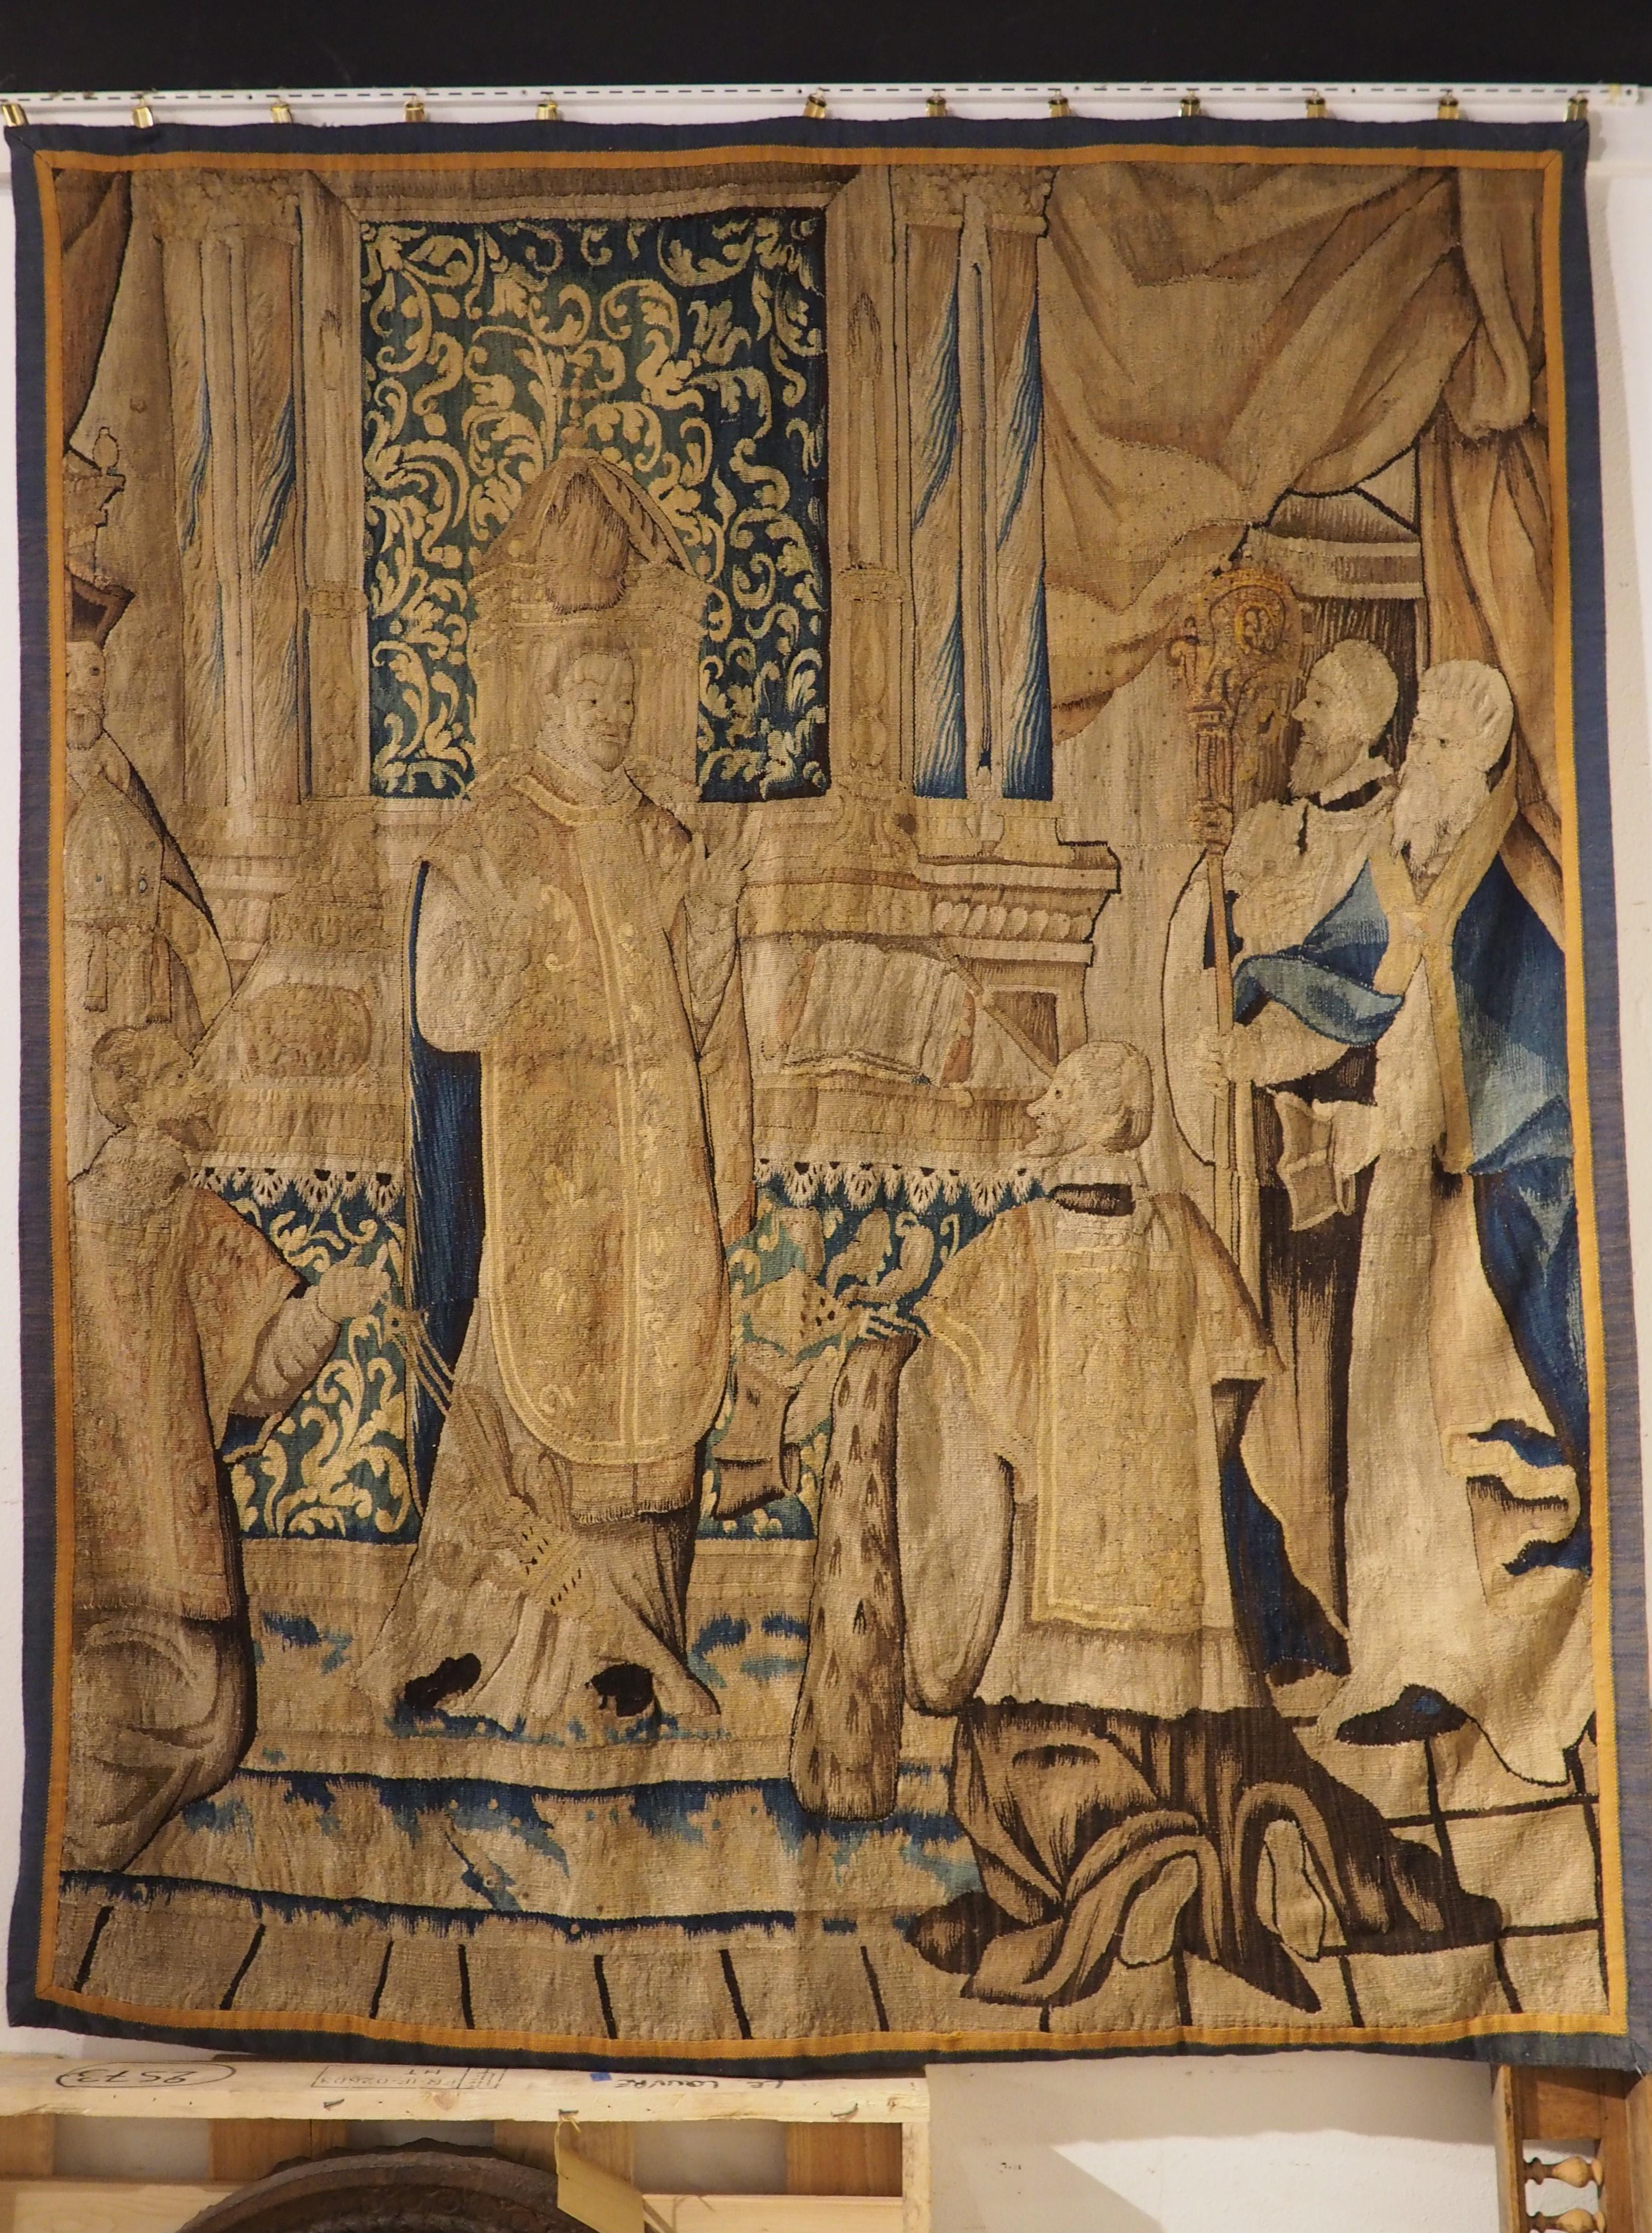 Hand-woven in Brussels, circa 1650, this wool and silk tapestry depicts a church scene with six clergymen at an altar. After roughly 375 years, the colors are still vibrant, highlighted by fabrics of blue that punctuate the predominately gold,